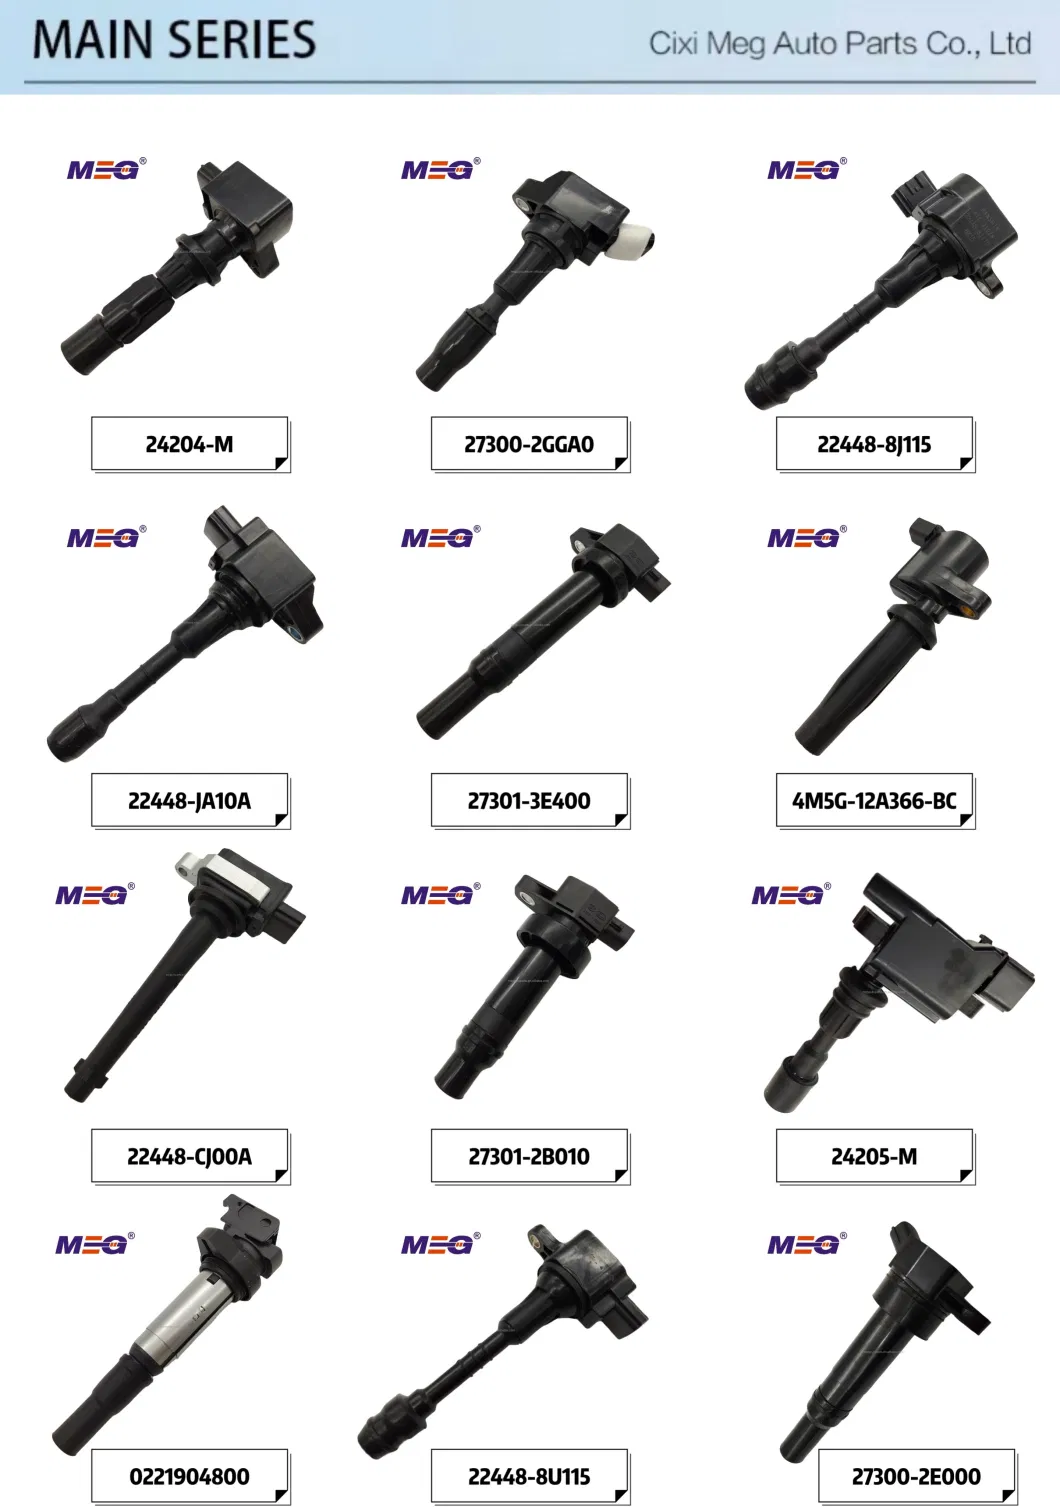 Manufactures Auto Parts Buy Ignition Coils OEM 27301-2b010 for Hyundai KIA